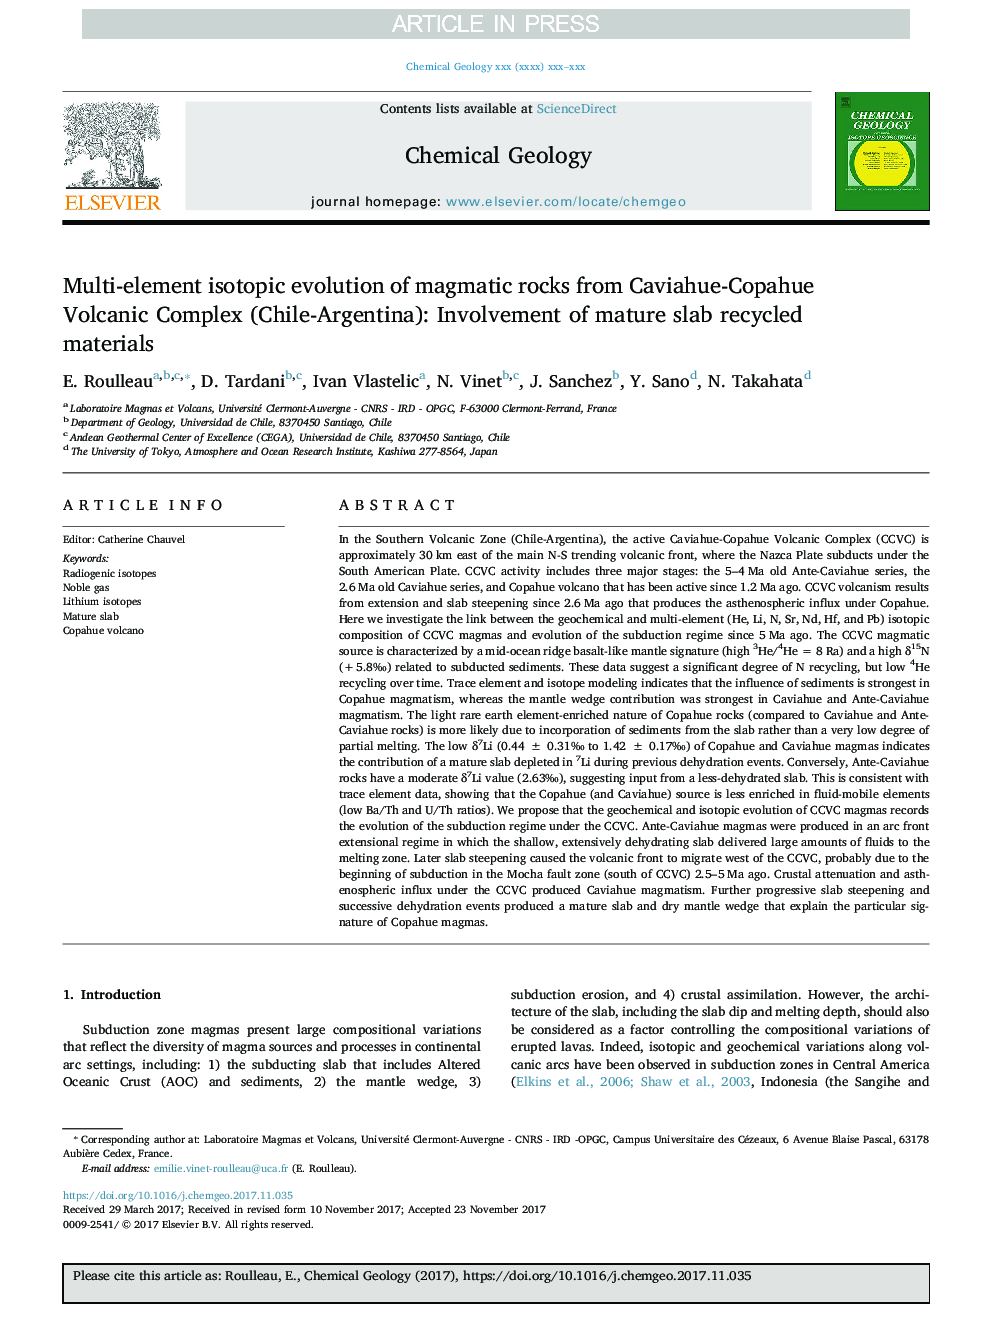 Multi-element isotopic evolution of magmatic rocks from Caviahue-Copahue Volcanic Complex (Chile-Argentina): Involvement of mature slab recycled materials